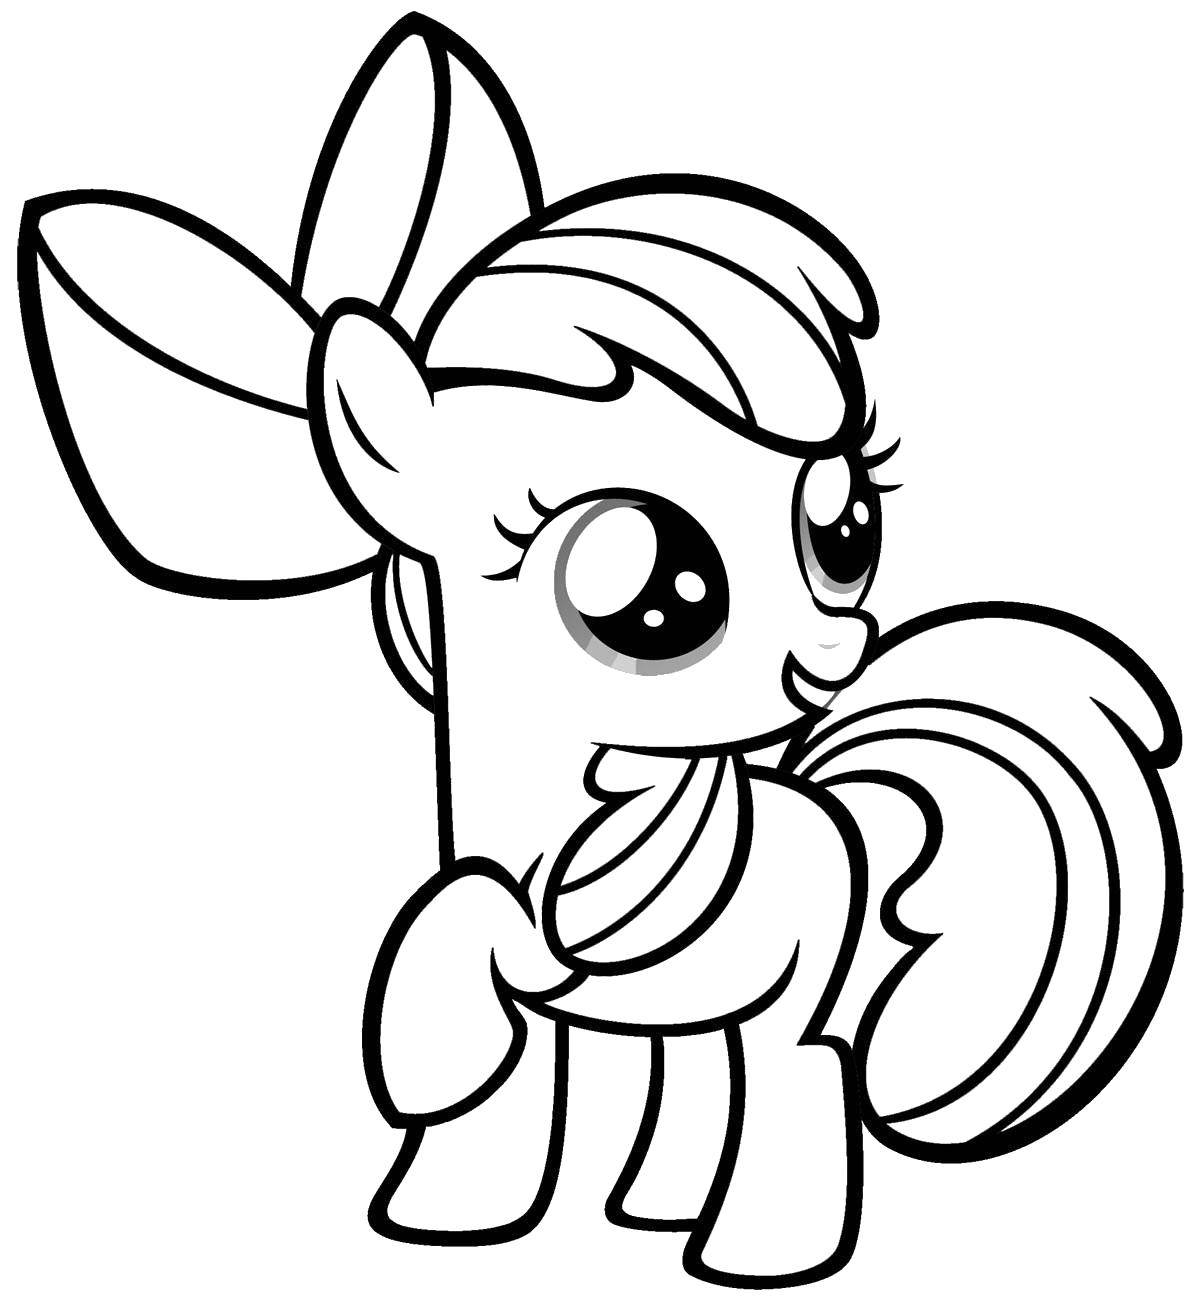 Coloring Poreska from my little pony. Category my little pony. Tags:  Pony, My little pony.